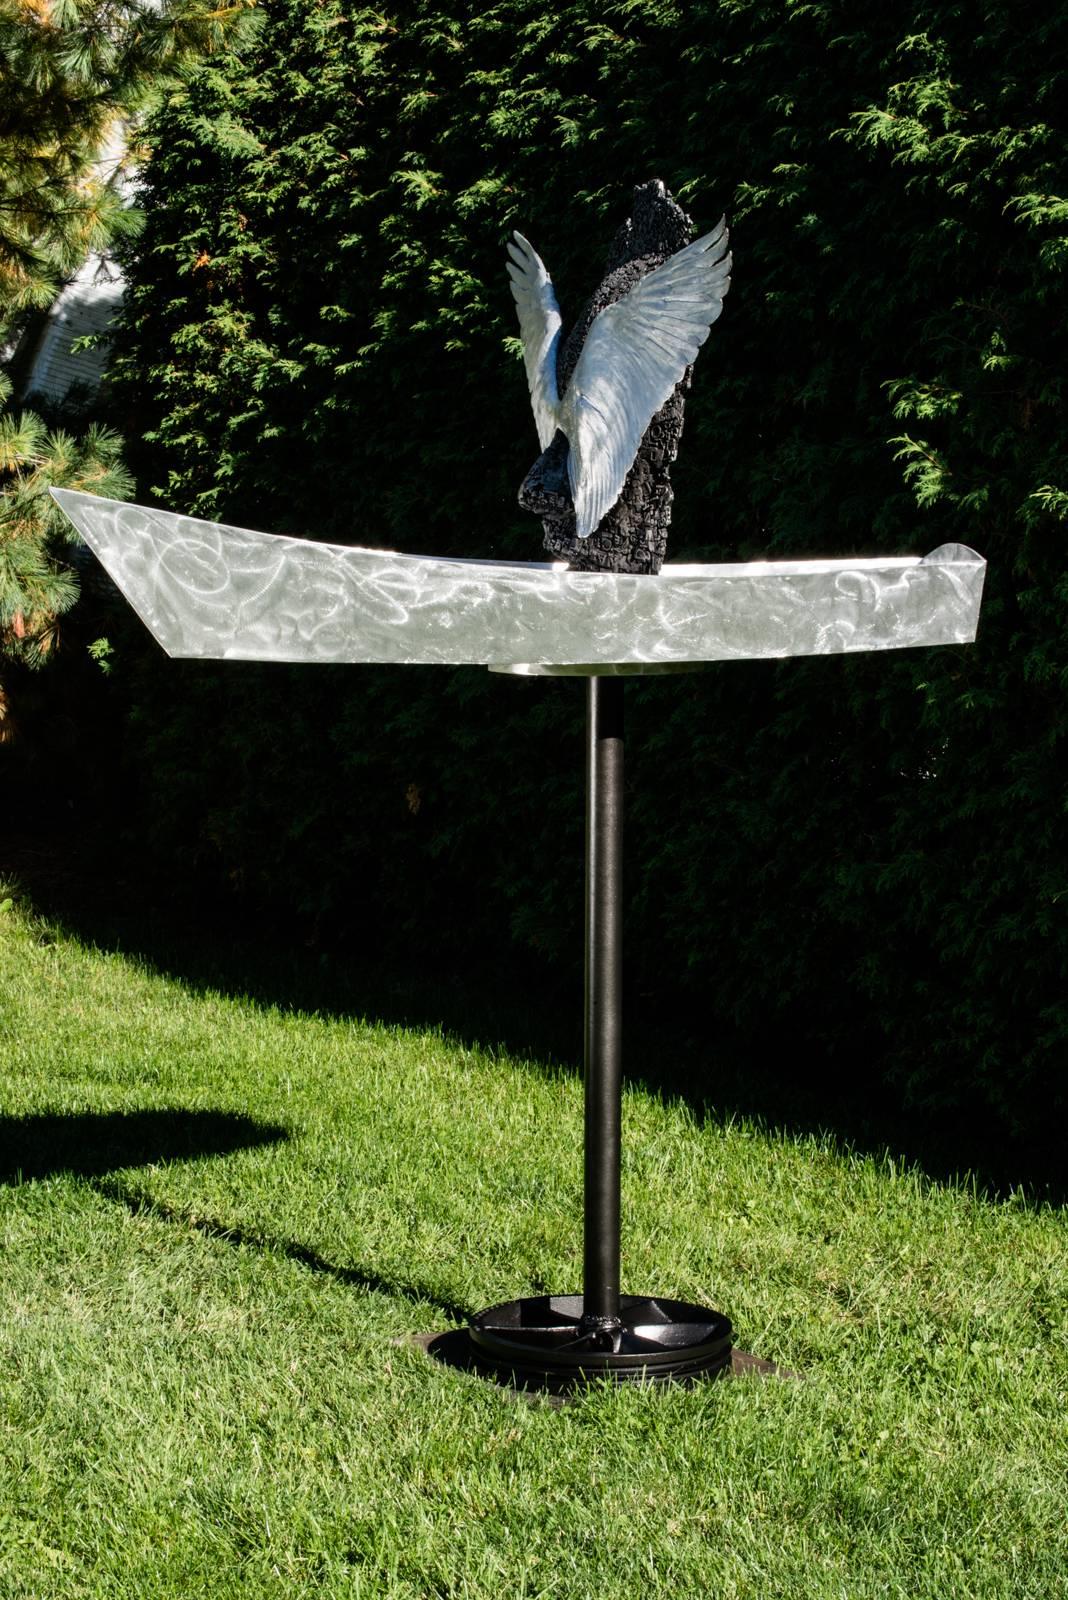 Odyssey - winged figure in boat - outdoor water feature For Sale 3